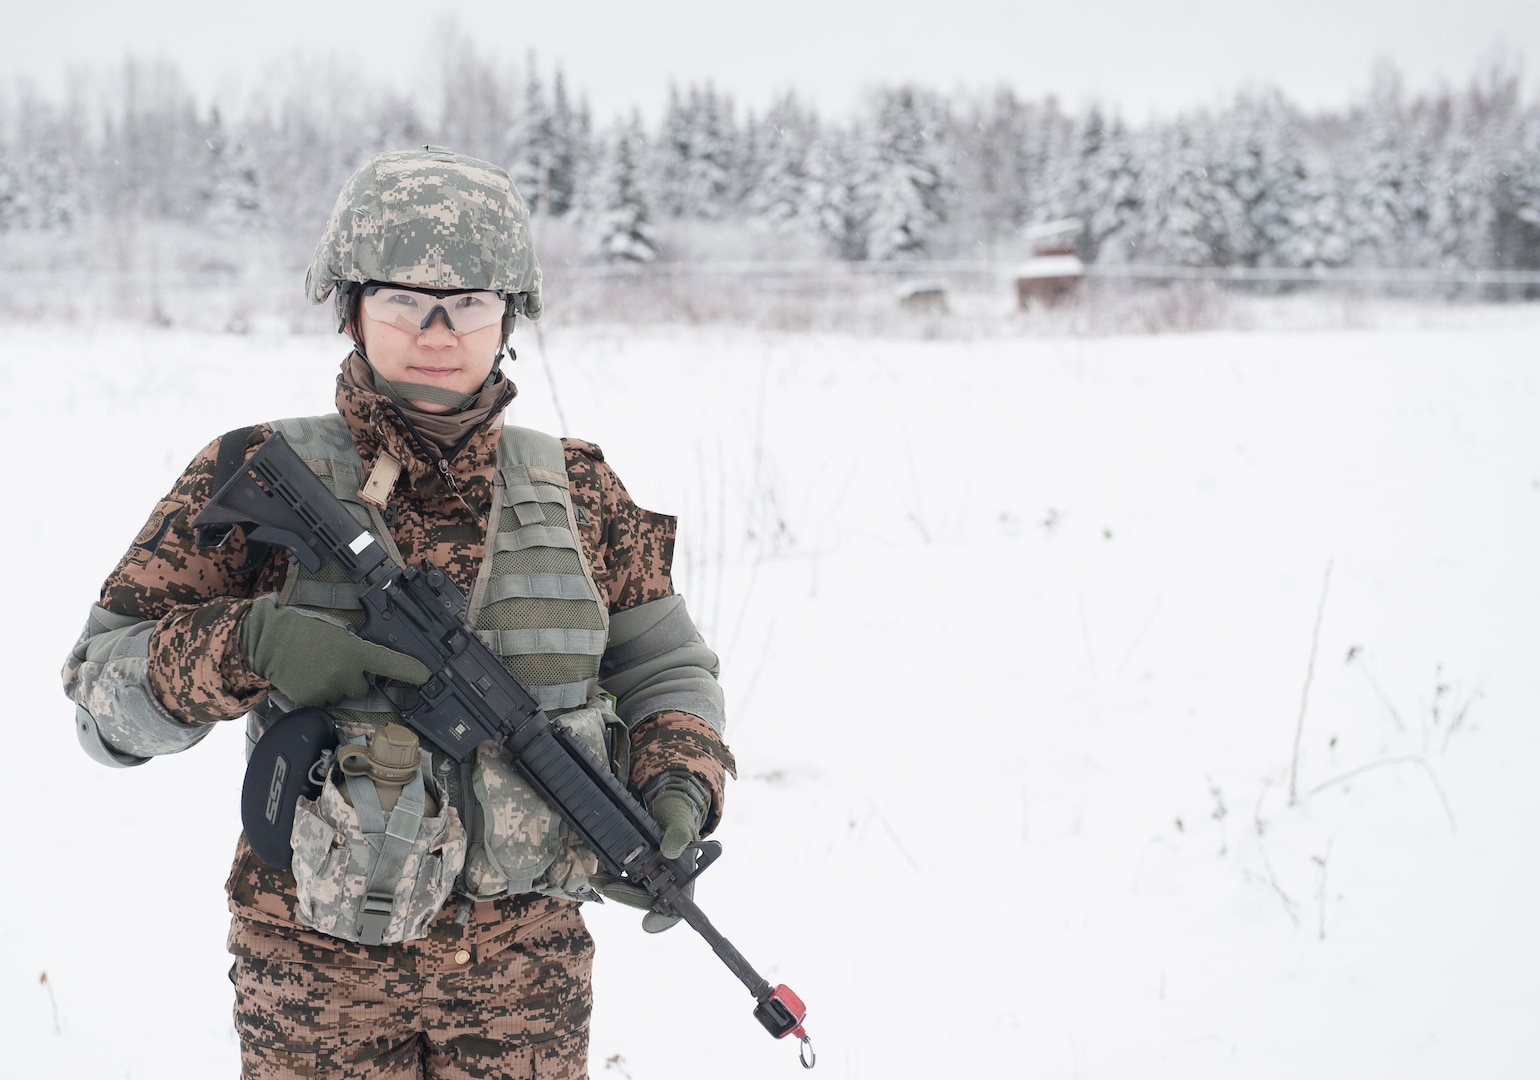 Mongolian Army Sgt. Mungunchimeg Nyamaajav stands ready to participate in the Warrior Leadership Course’s Situational Training Exercise at Joint Base Elmendorf-Richardson, Alaska, Nov. 3, 2015. Nyamaajav is the first female Mongolian soldier to train with U.S. Army Alaska. (U.S. Army photo/Sachel Harris)